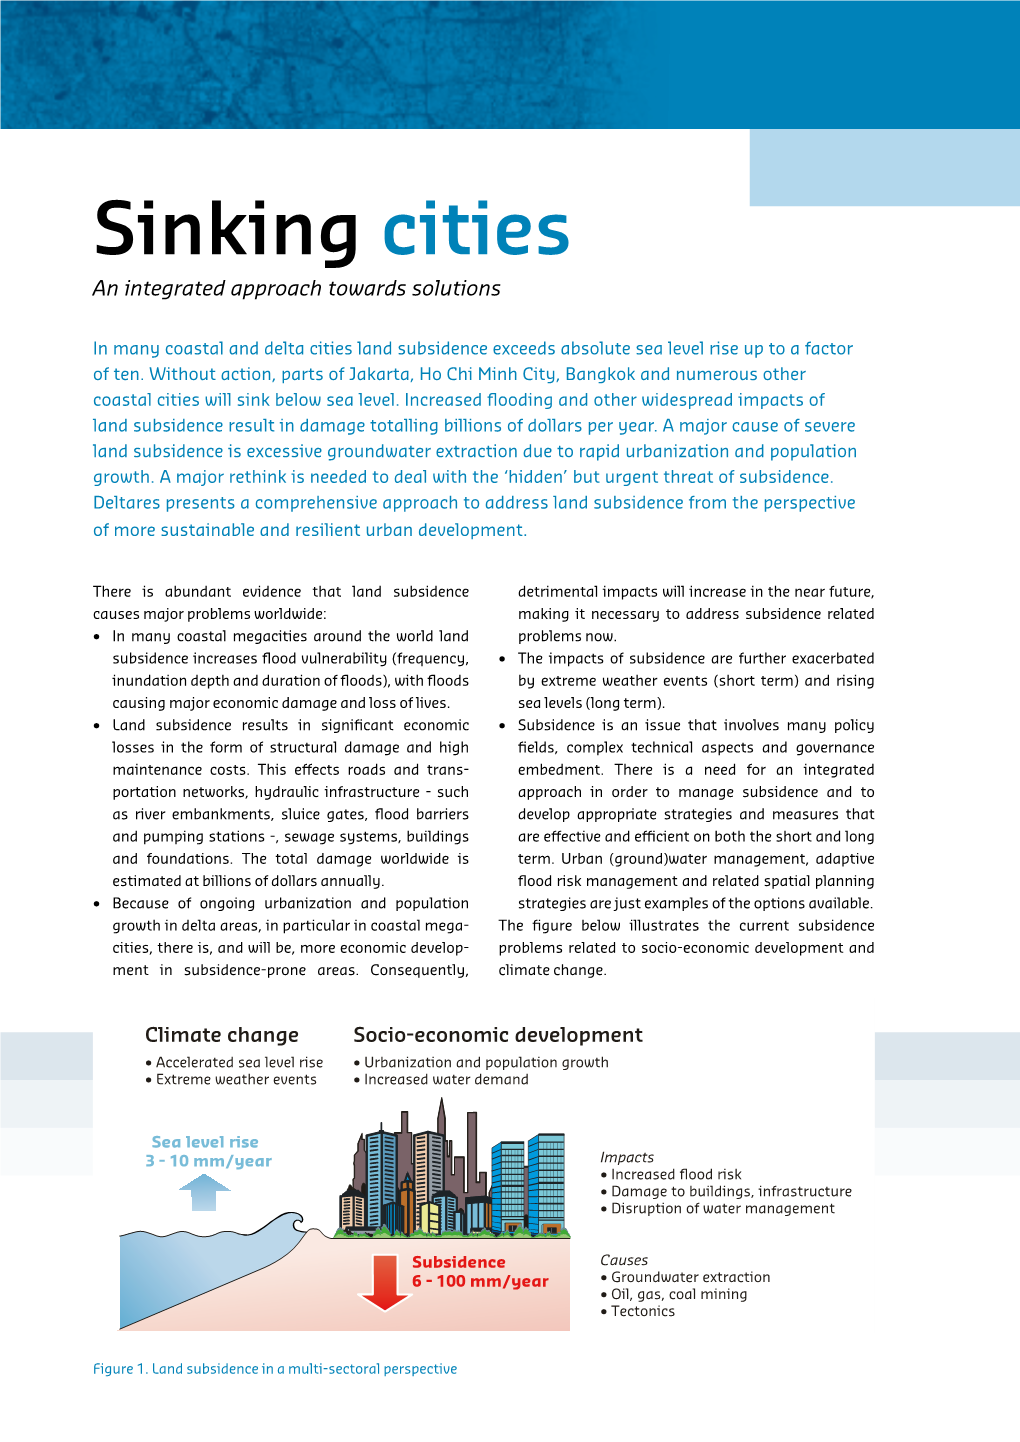 Sinking Cities an Integrated Approach Towards Solutions